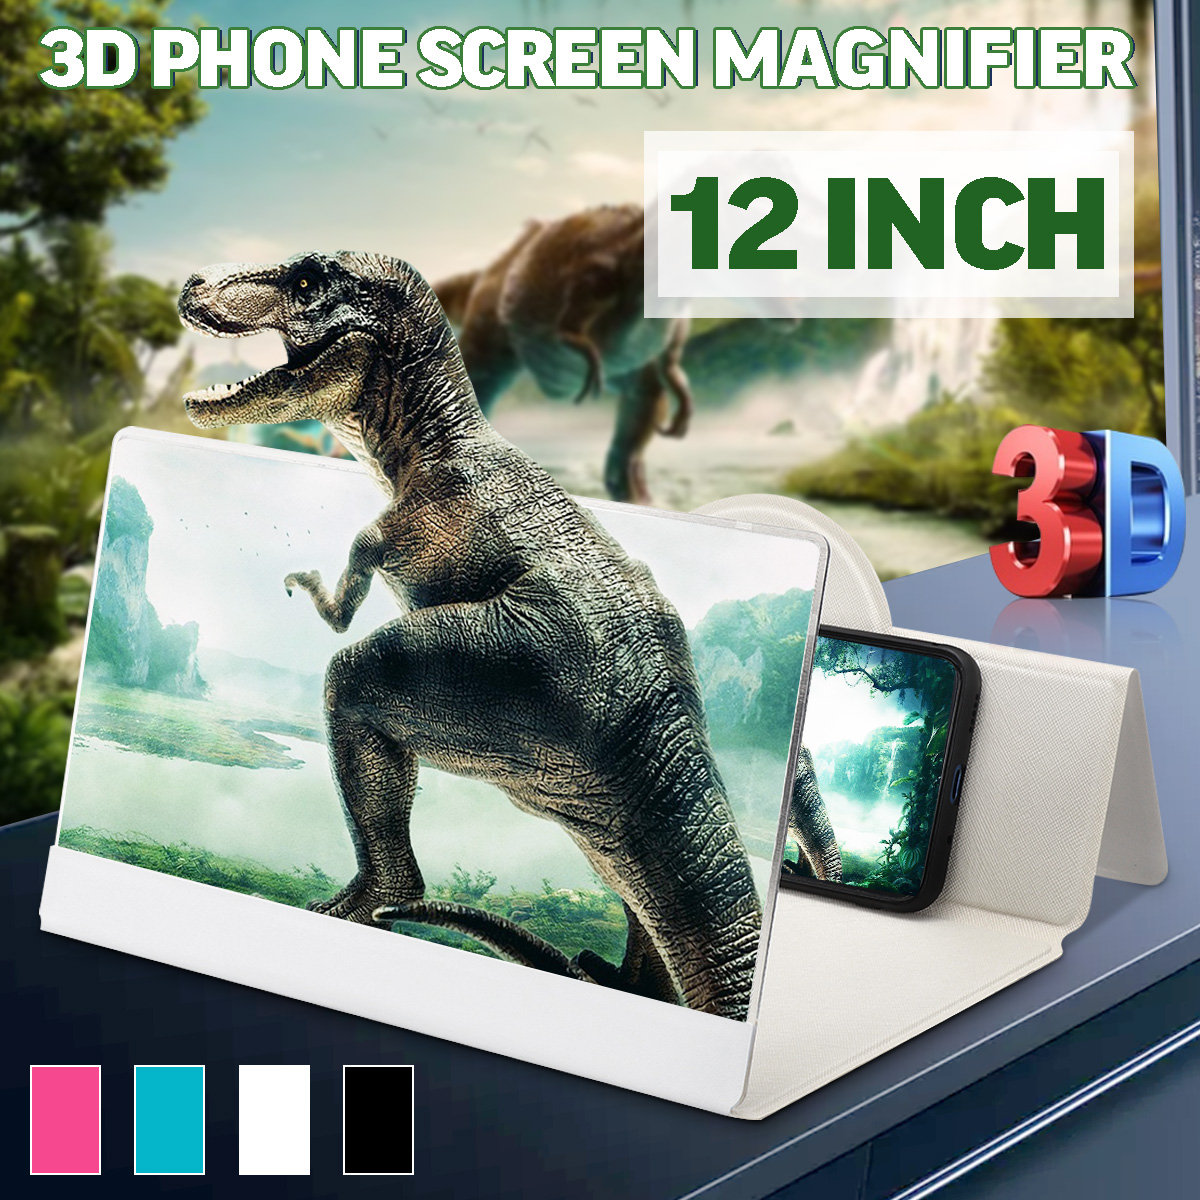 12-Inches-Foldable-3D-HD-Phone-Screen-Magnifier-Movie-Video-Amplifier-PU-Leather-Cover-For-Smart-Pho-1558972-1